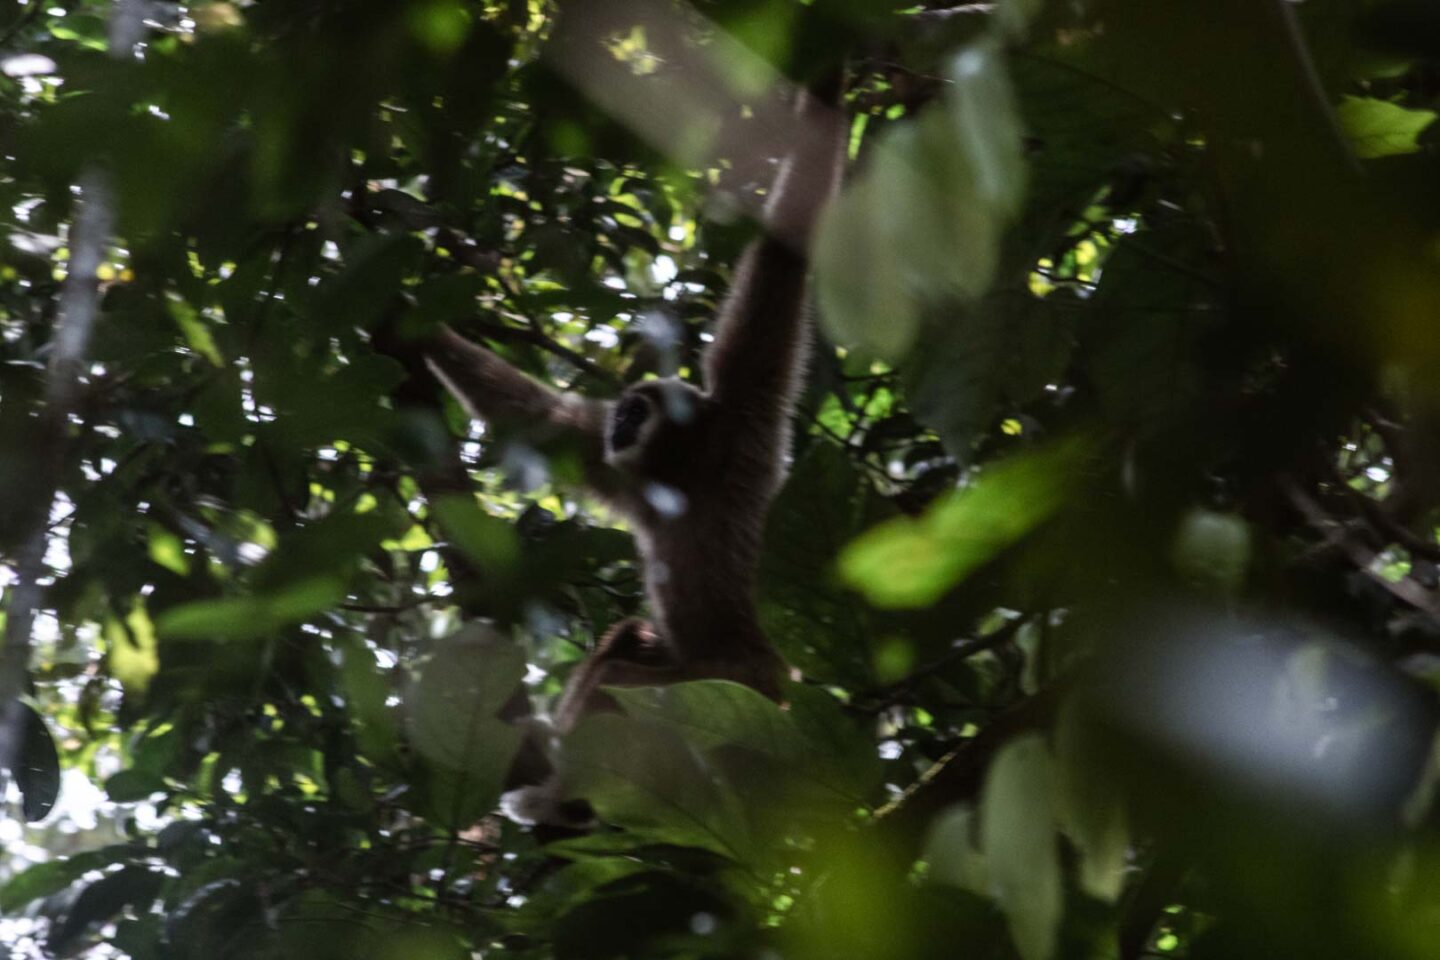 Gibbon swinging from a tree in Sumatra, Indonesia